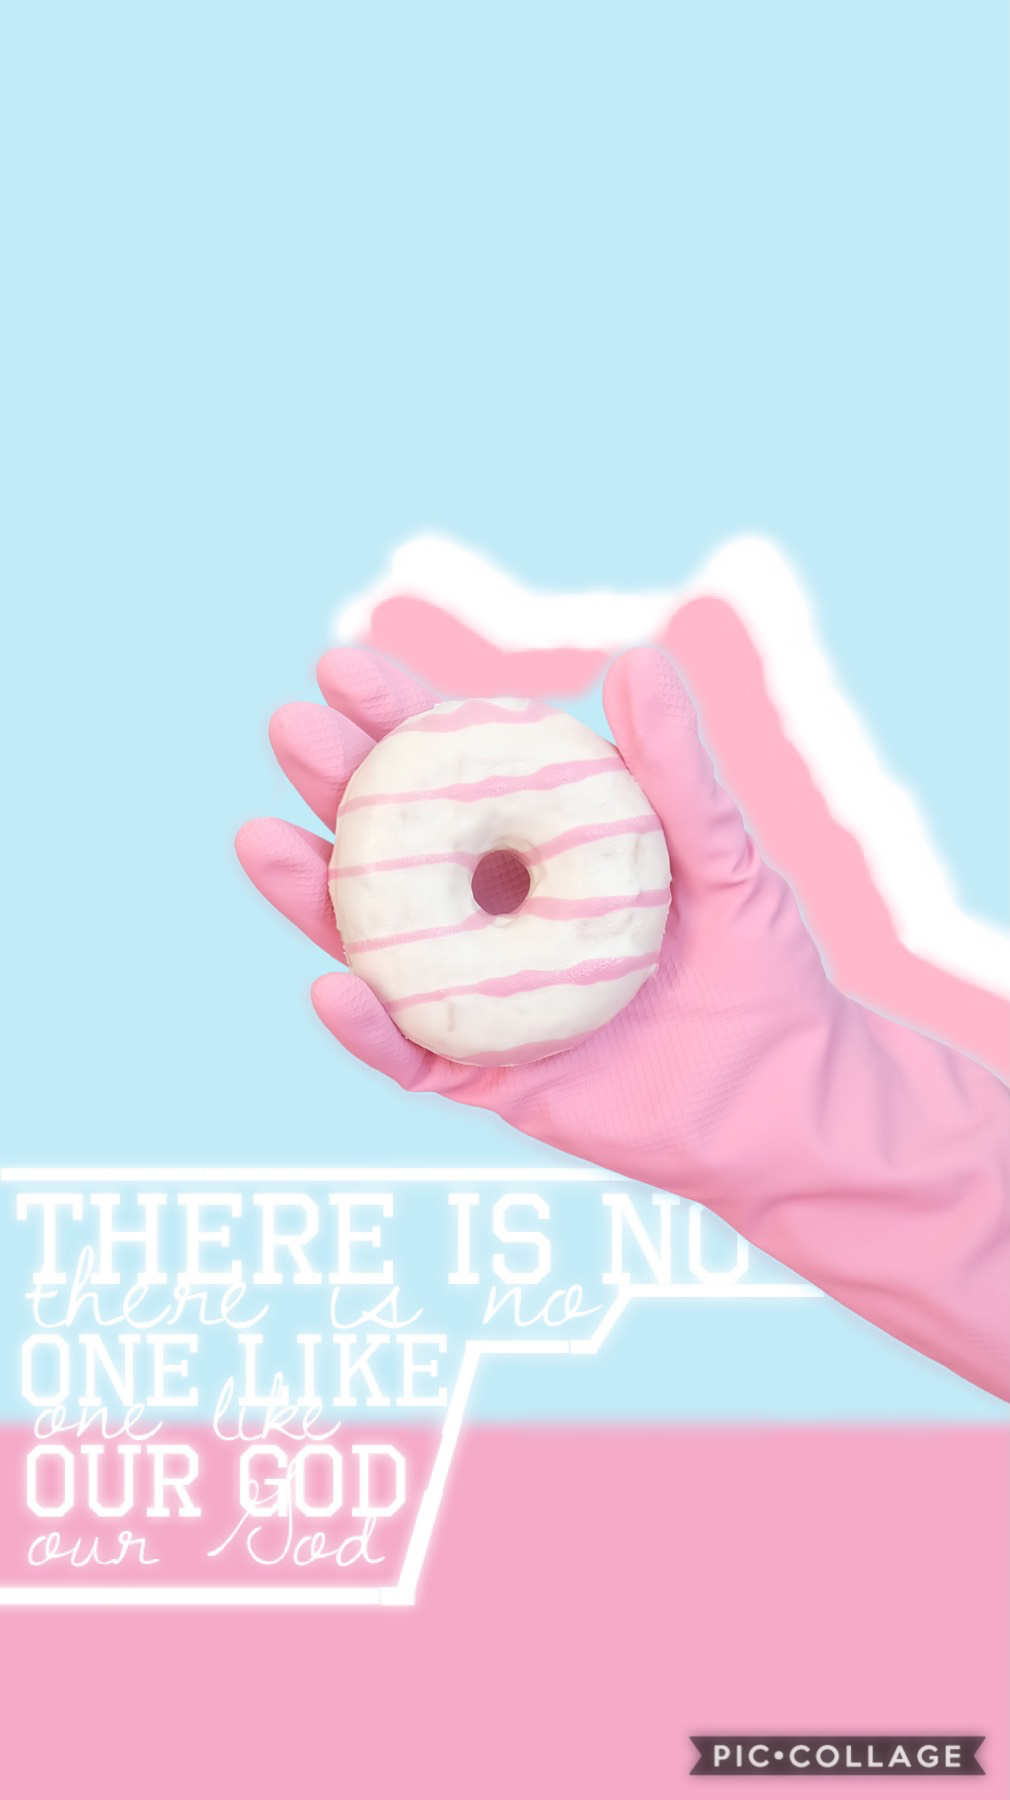 🍩🍩TAP🍩🍩
Entry to CrossEqualsLove contest!!